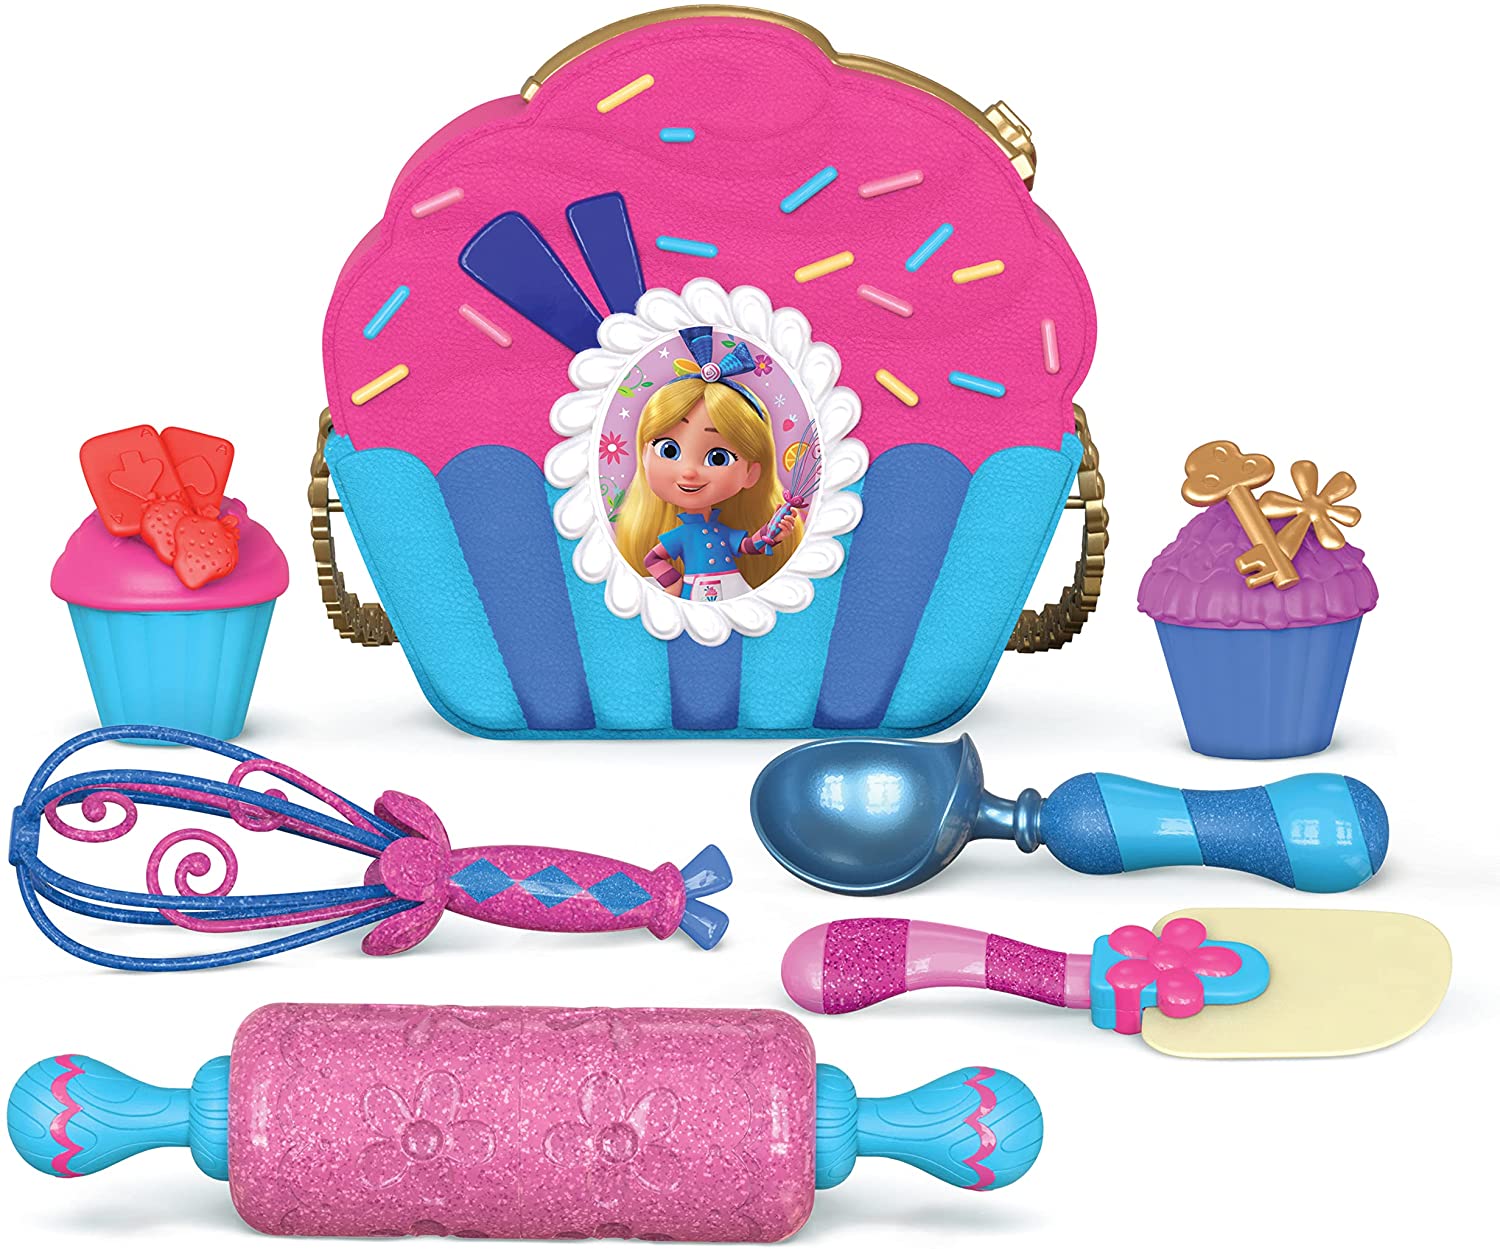 Disney Junior Alice's Wonderland Bakery 10 Inch Alice & Magical Oven  Playset with Doll and Accessories, Officially Licensed Kids Toys for Ages 3  Up, Gifts and Presents 